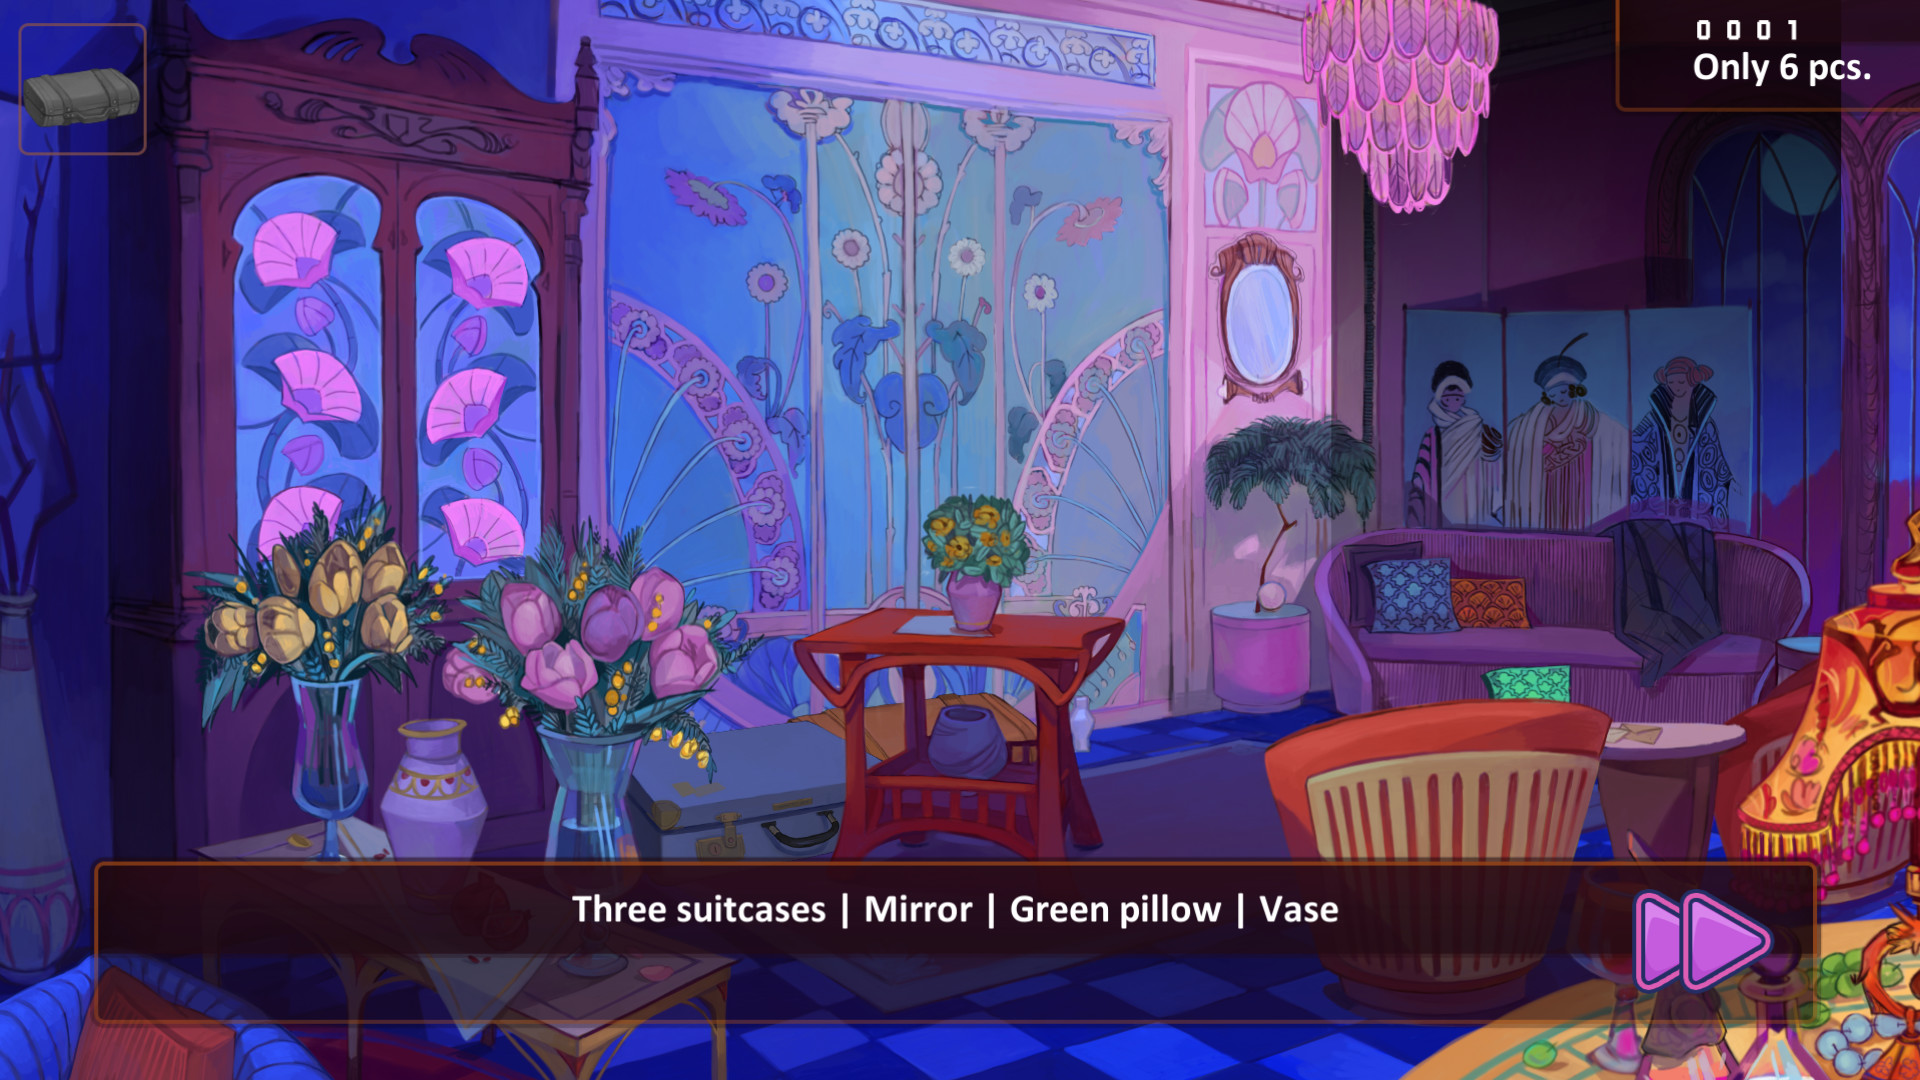 Abedot Family Estate: Search For Hidden Objects Steam CD Key